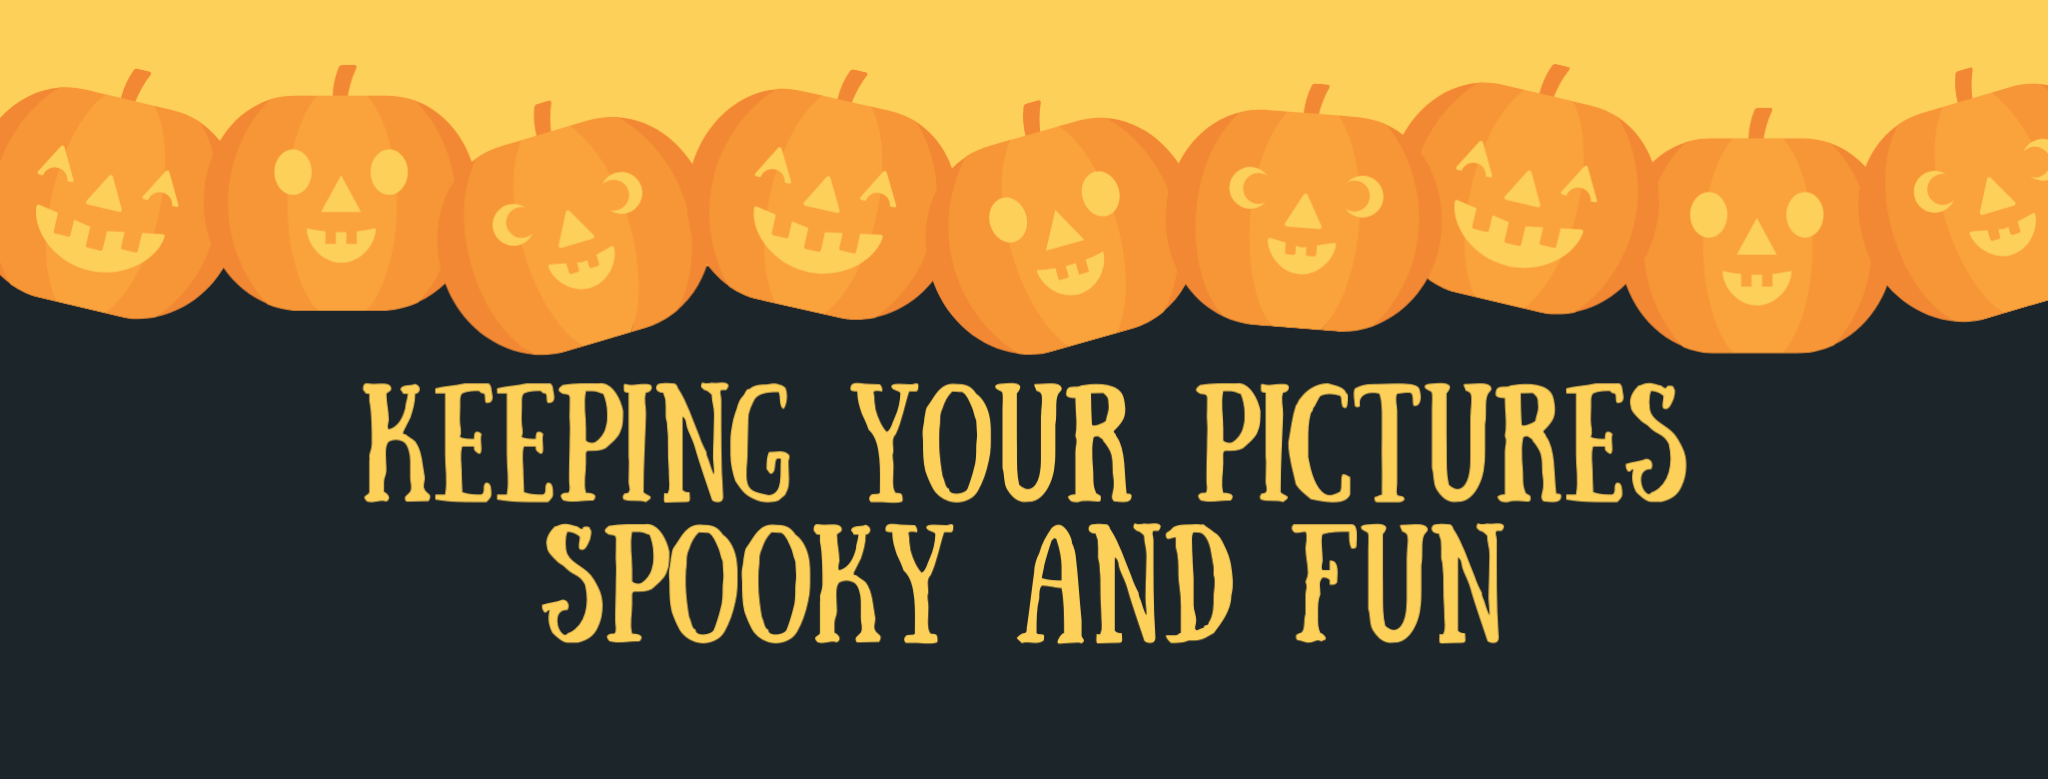 Keeping Your Pictures Spooky and Fun